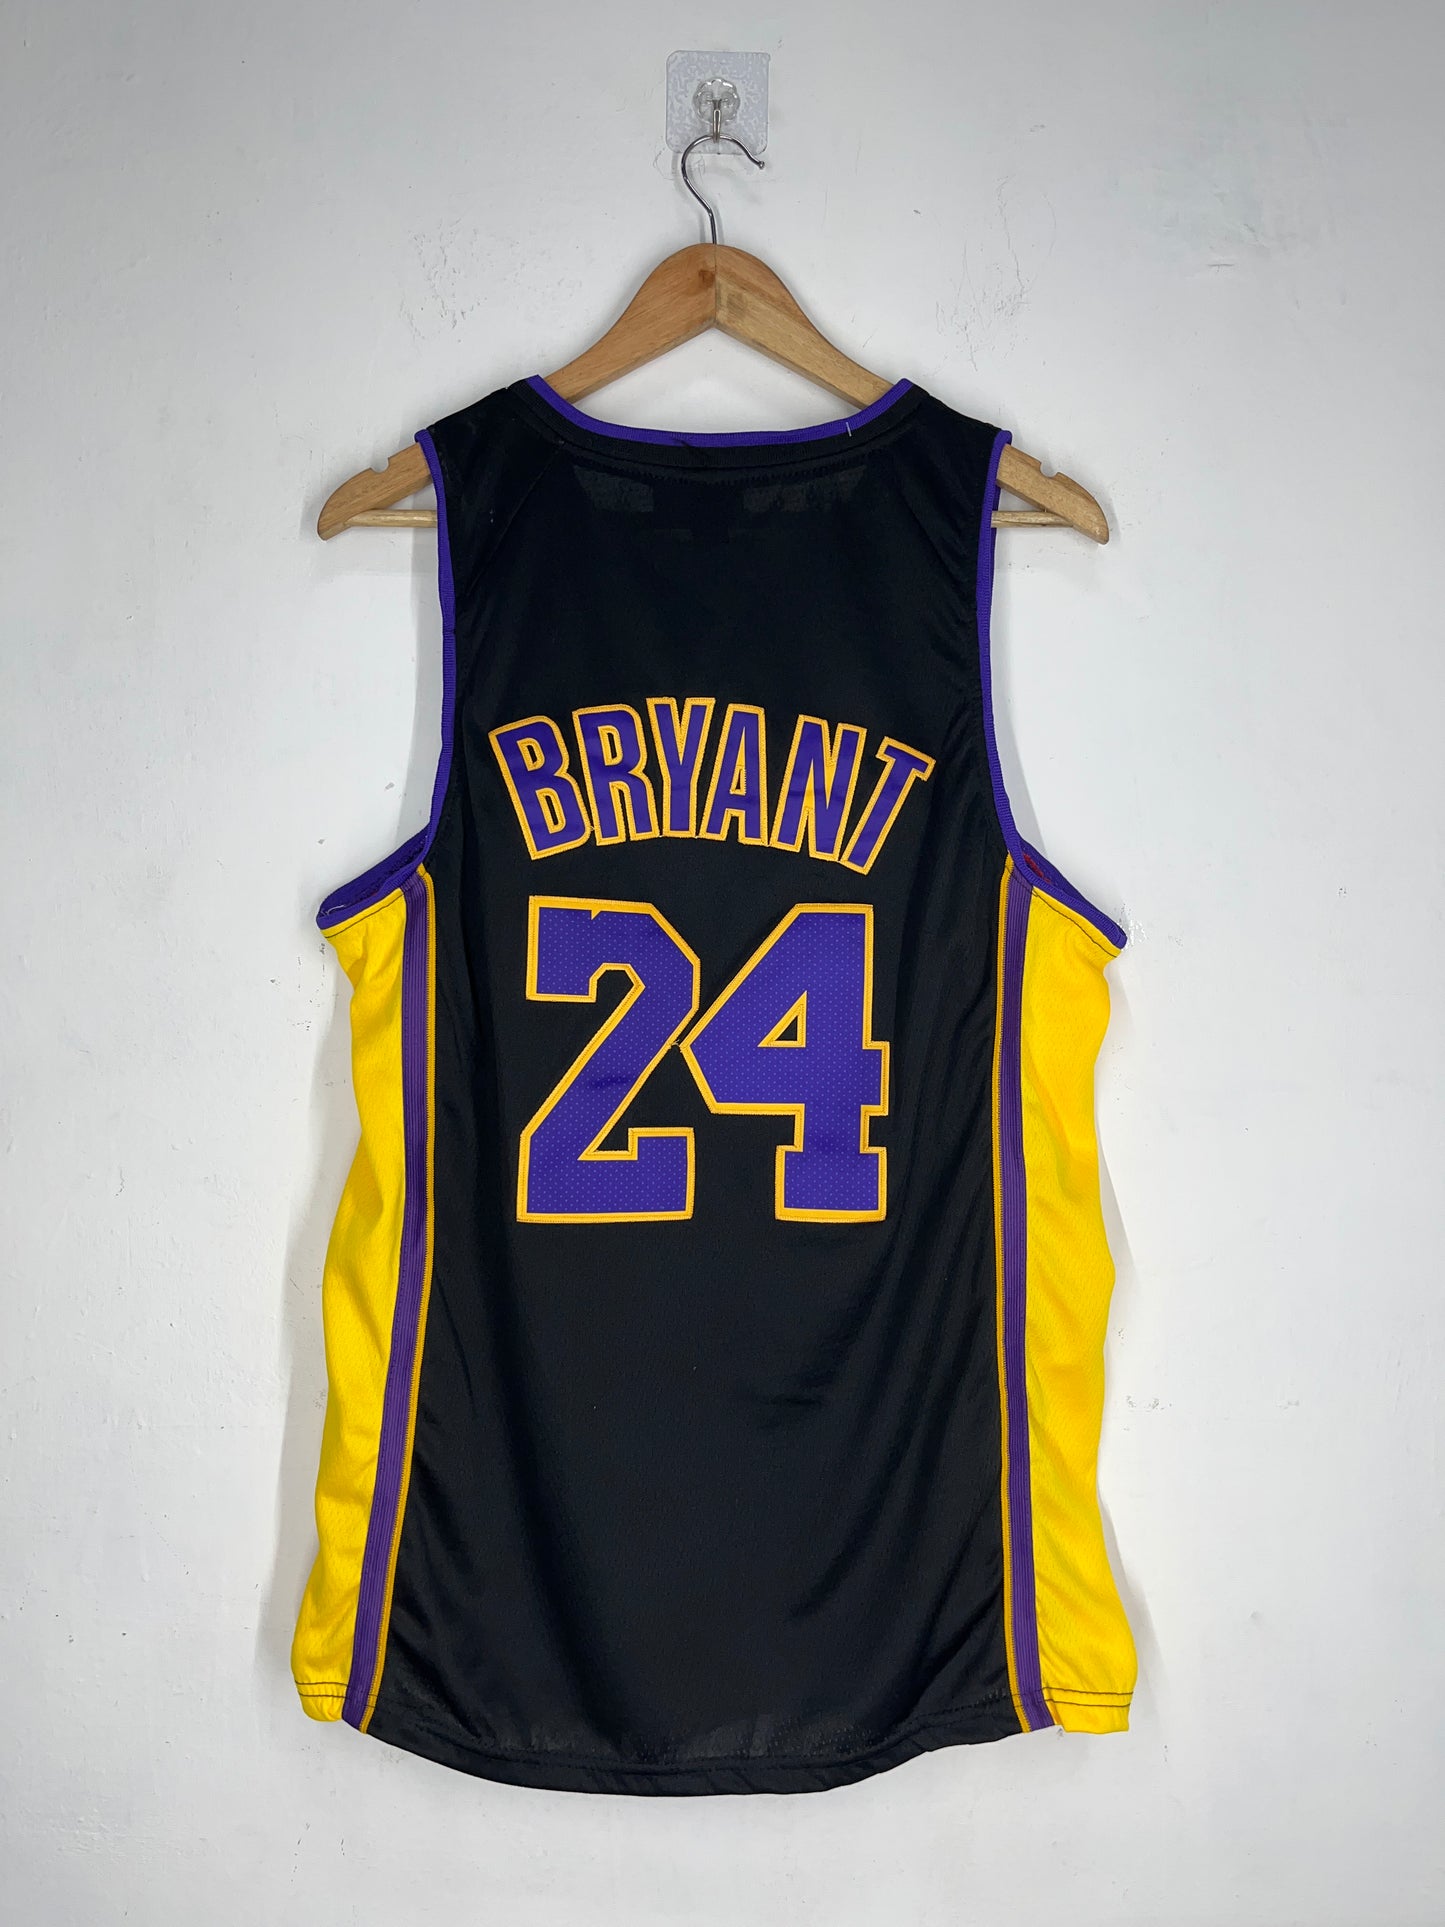 BRYANT 24 Black Los Angeles Lakers NBA Jersey Champions Edition